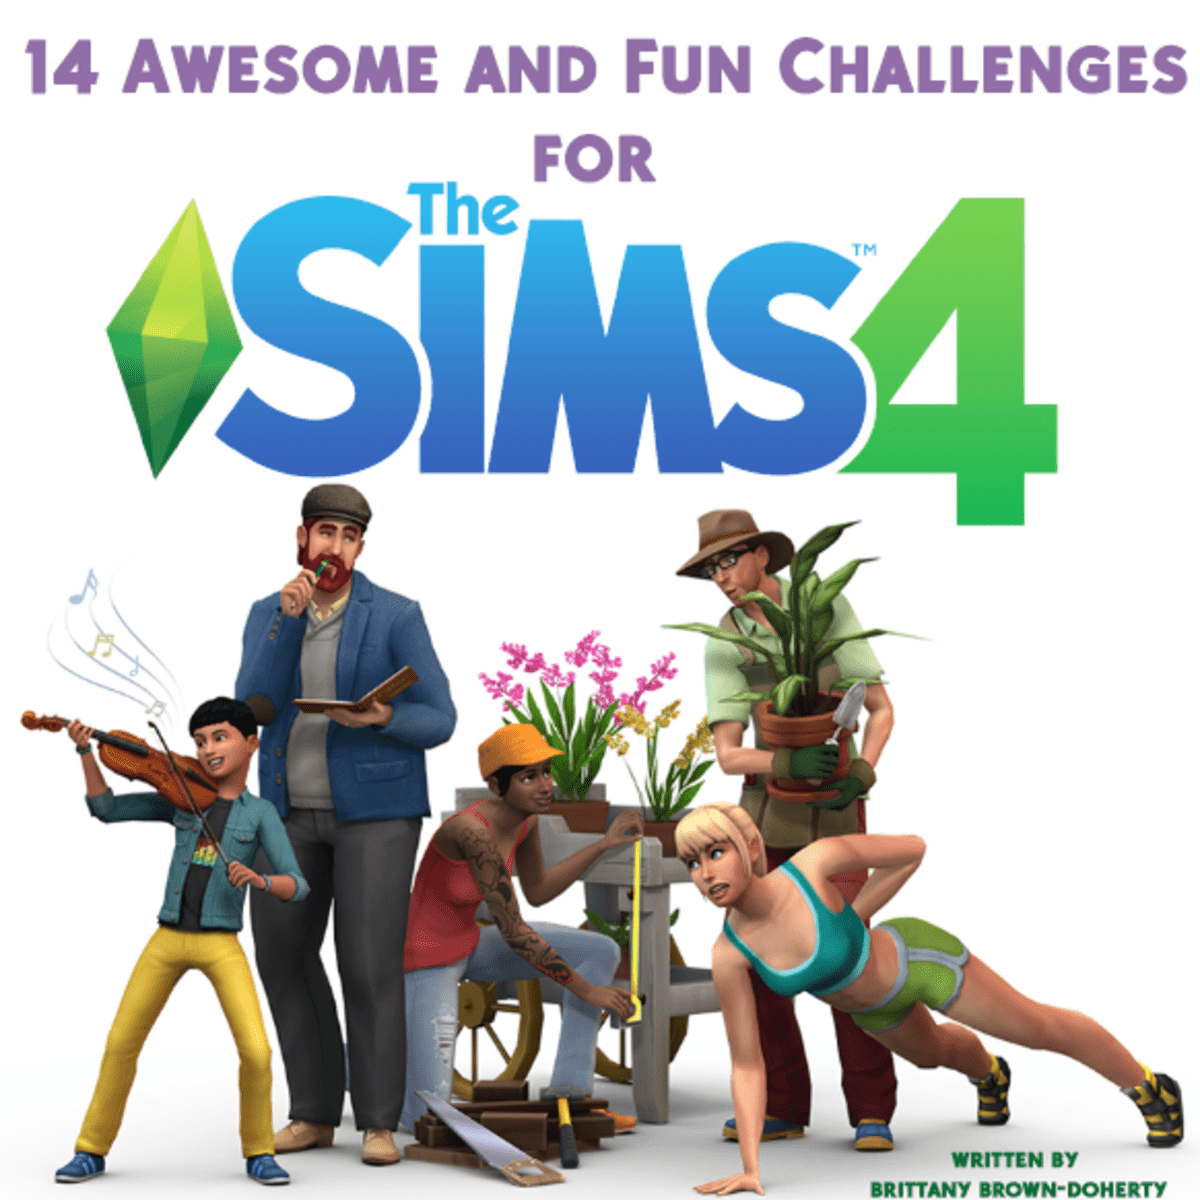 Pin by yousims on ➜ sims 4  Sims 4 challenges, Sims cheats, Sims 4 gameplay